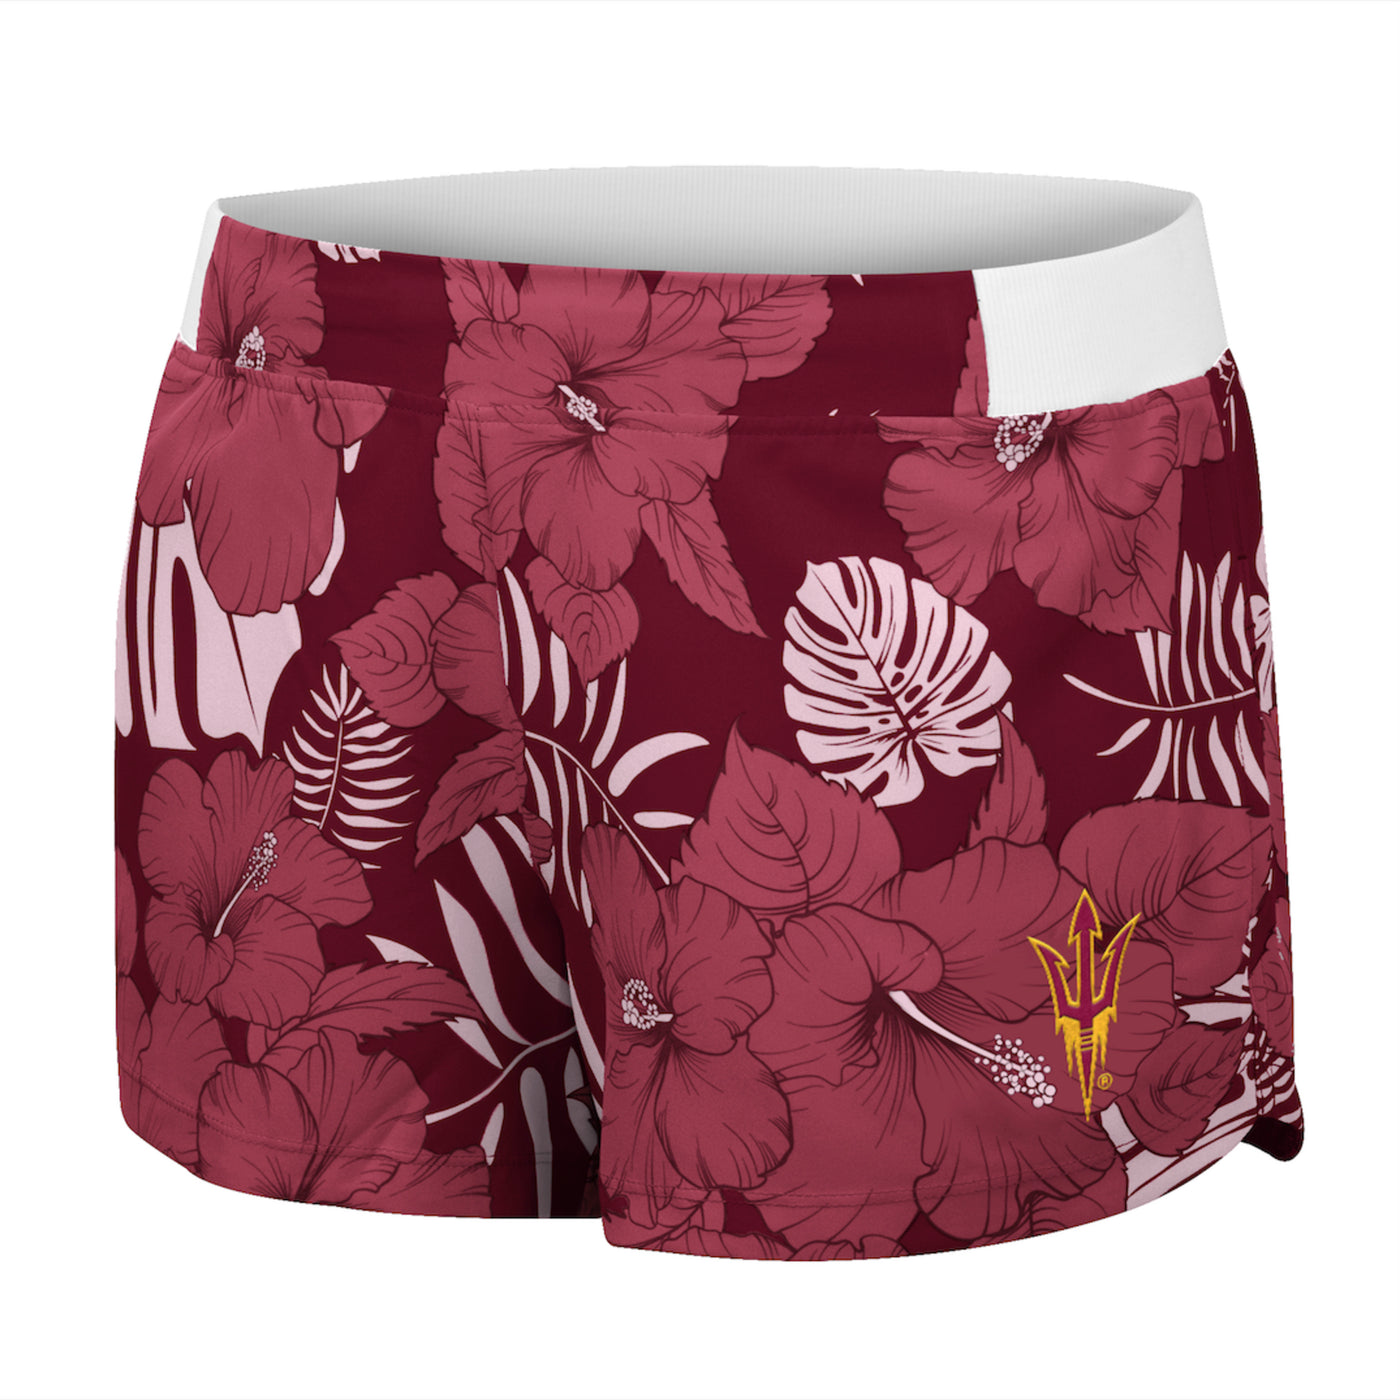 ASU Maroon women's shorts with tropical patter, white waistband, and pitchfork on left pant leg